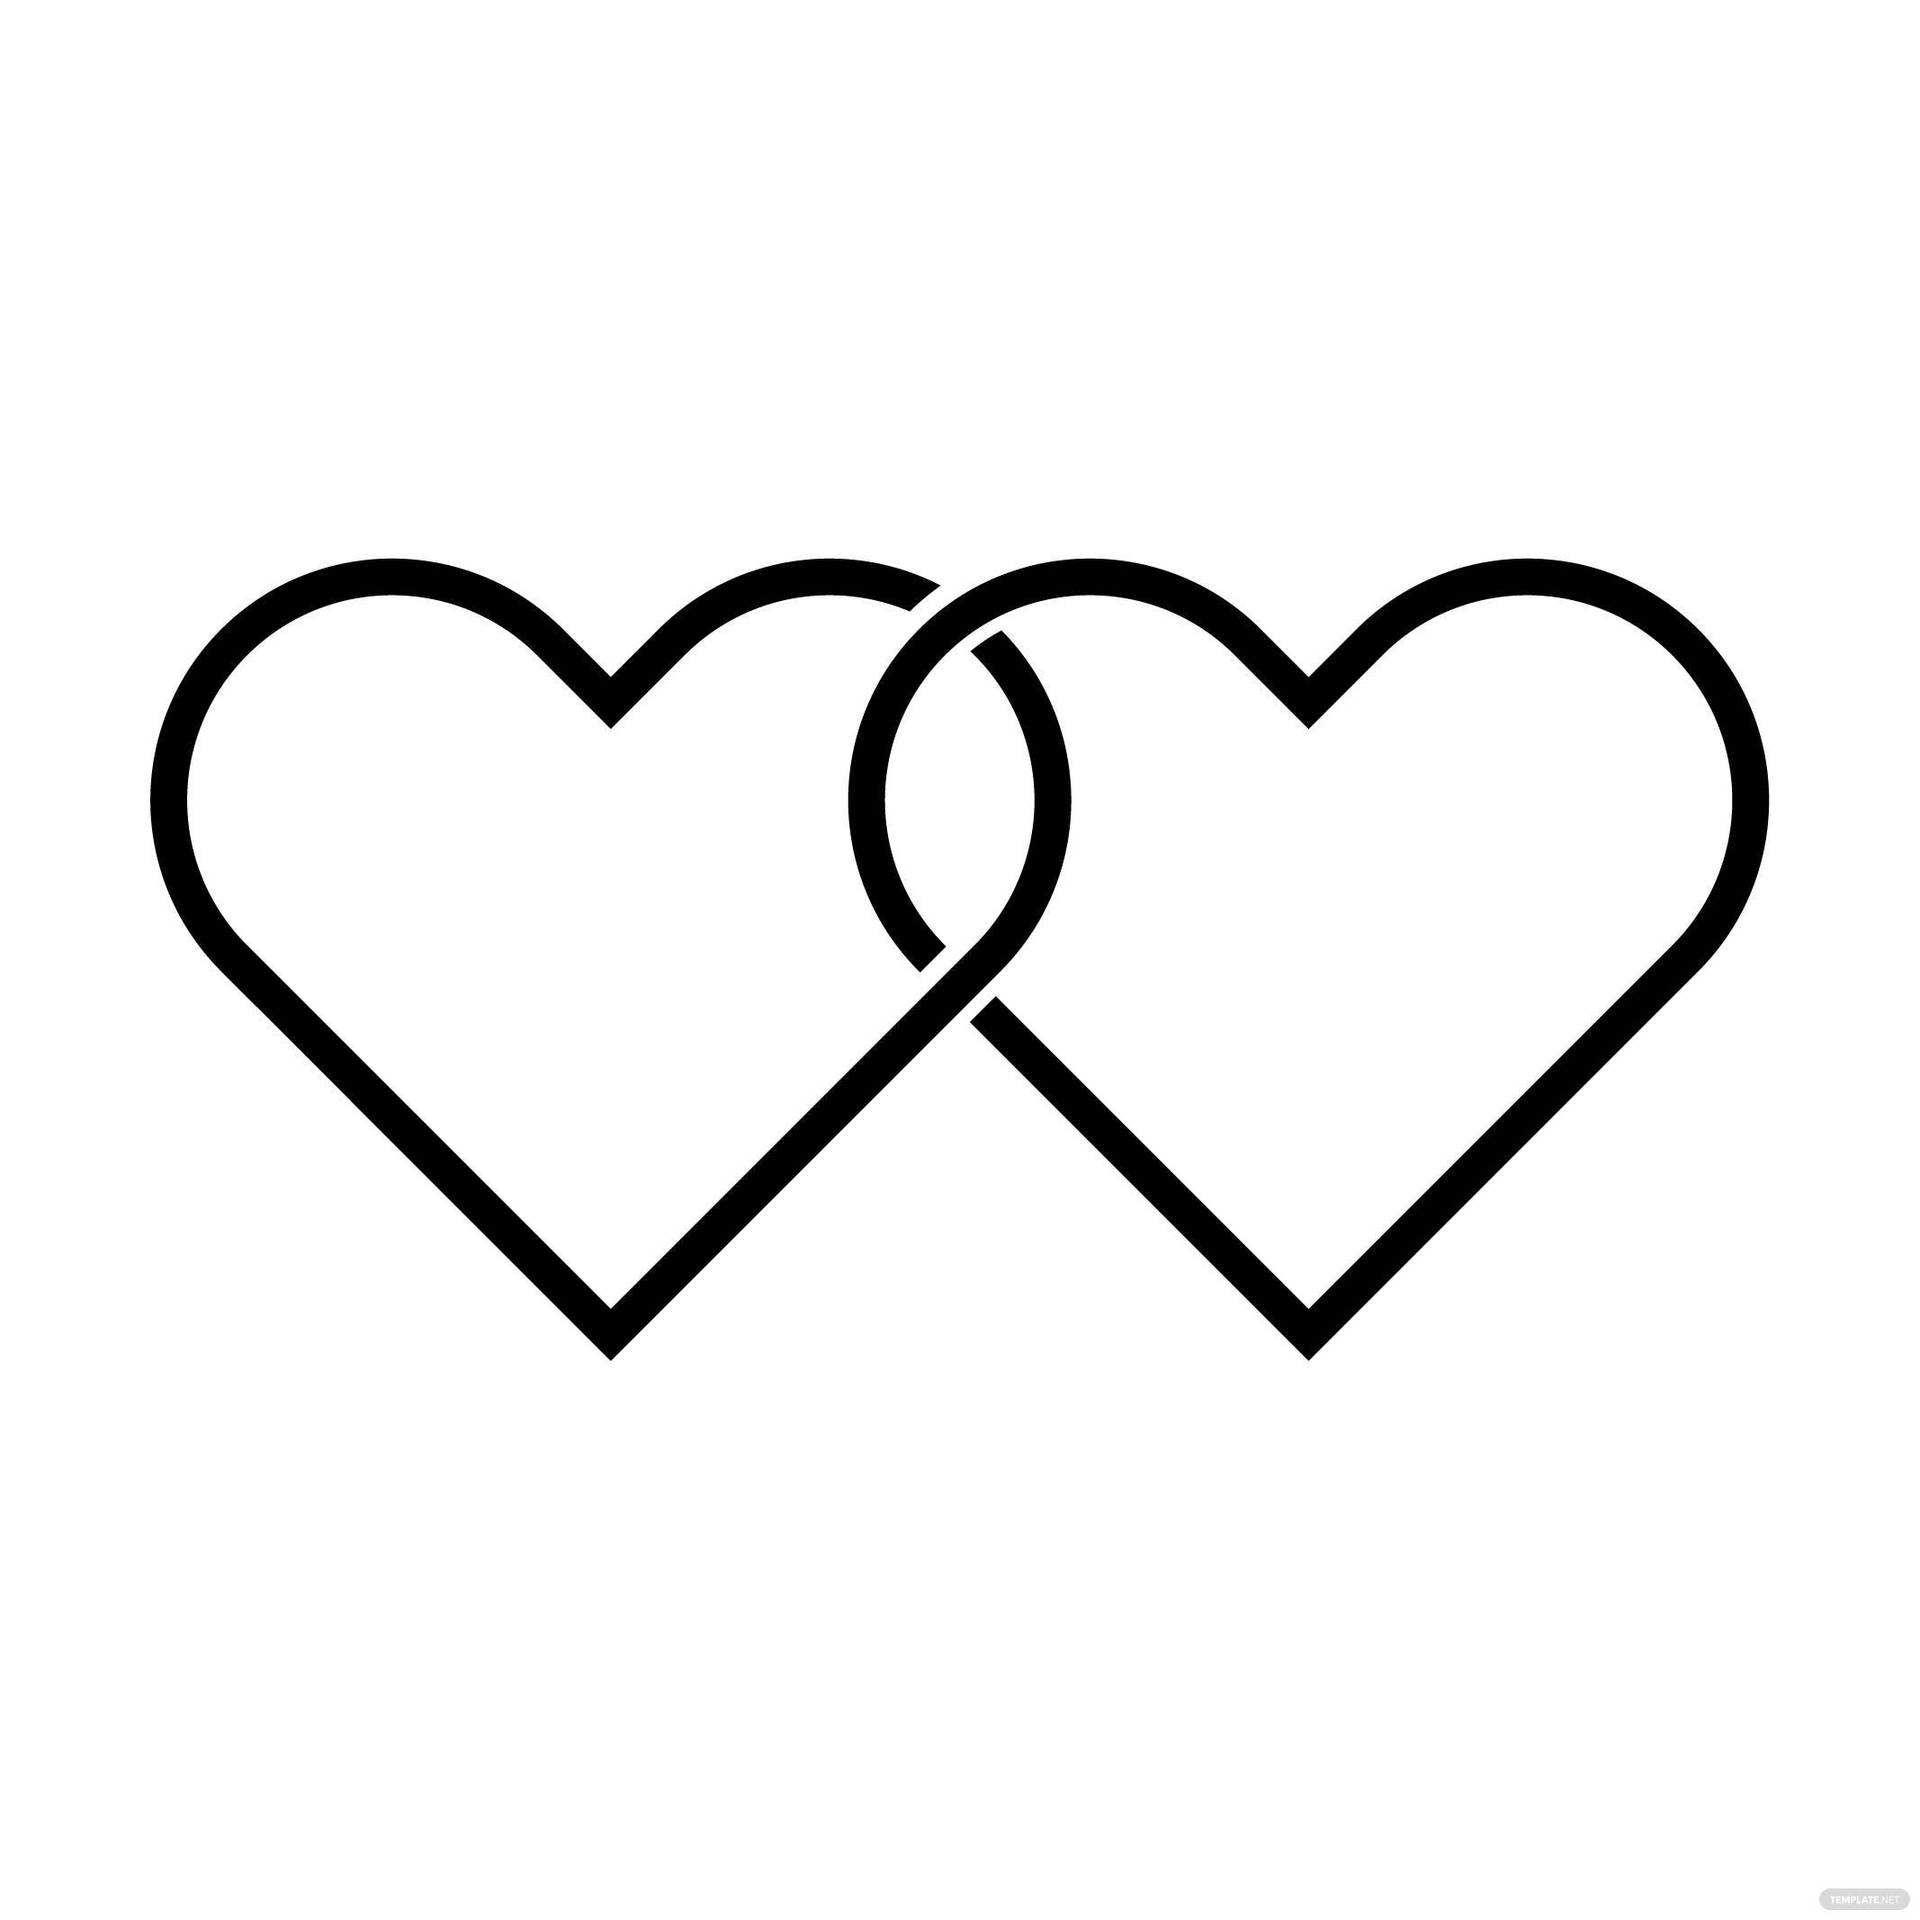 Two Connected White Hearts